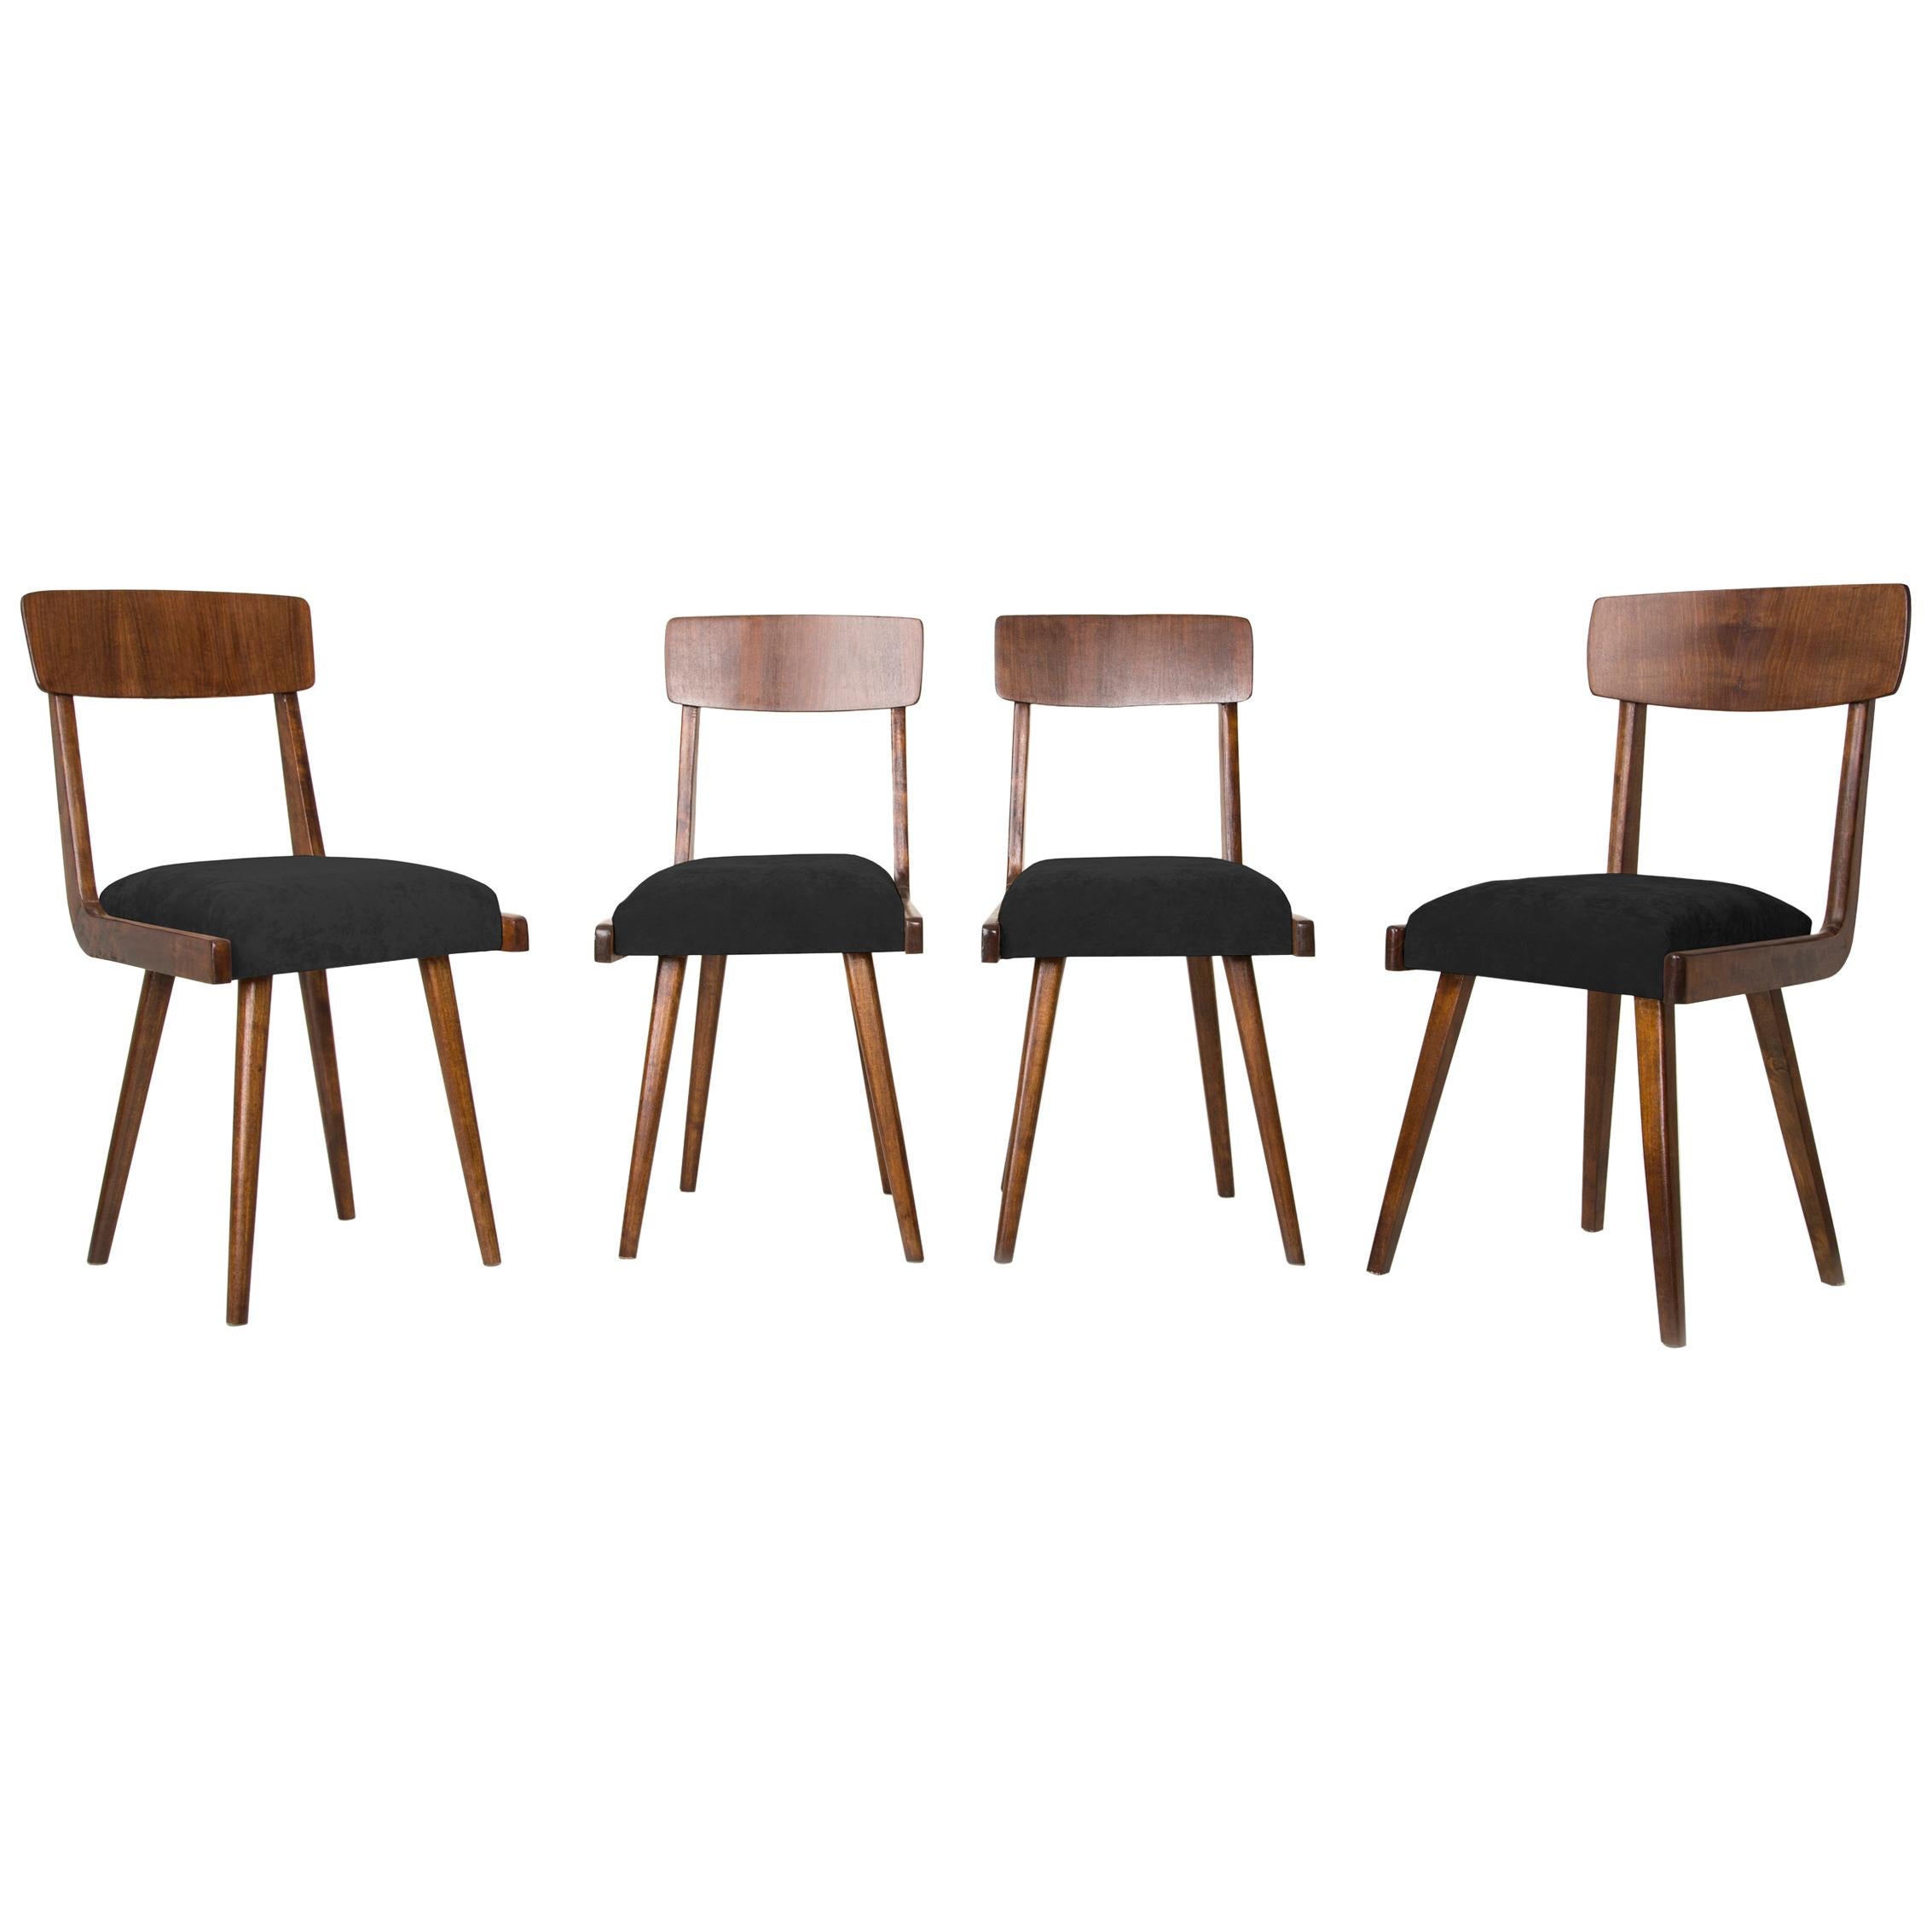 Set of Four 20th Century Black Wood Chairs, 1960s